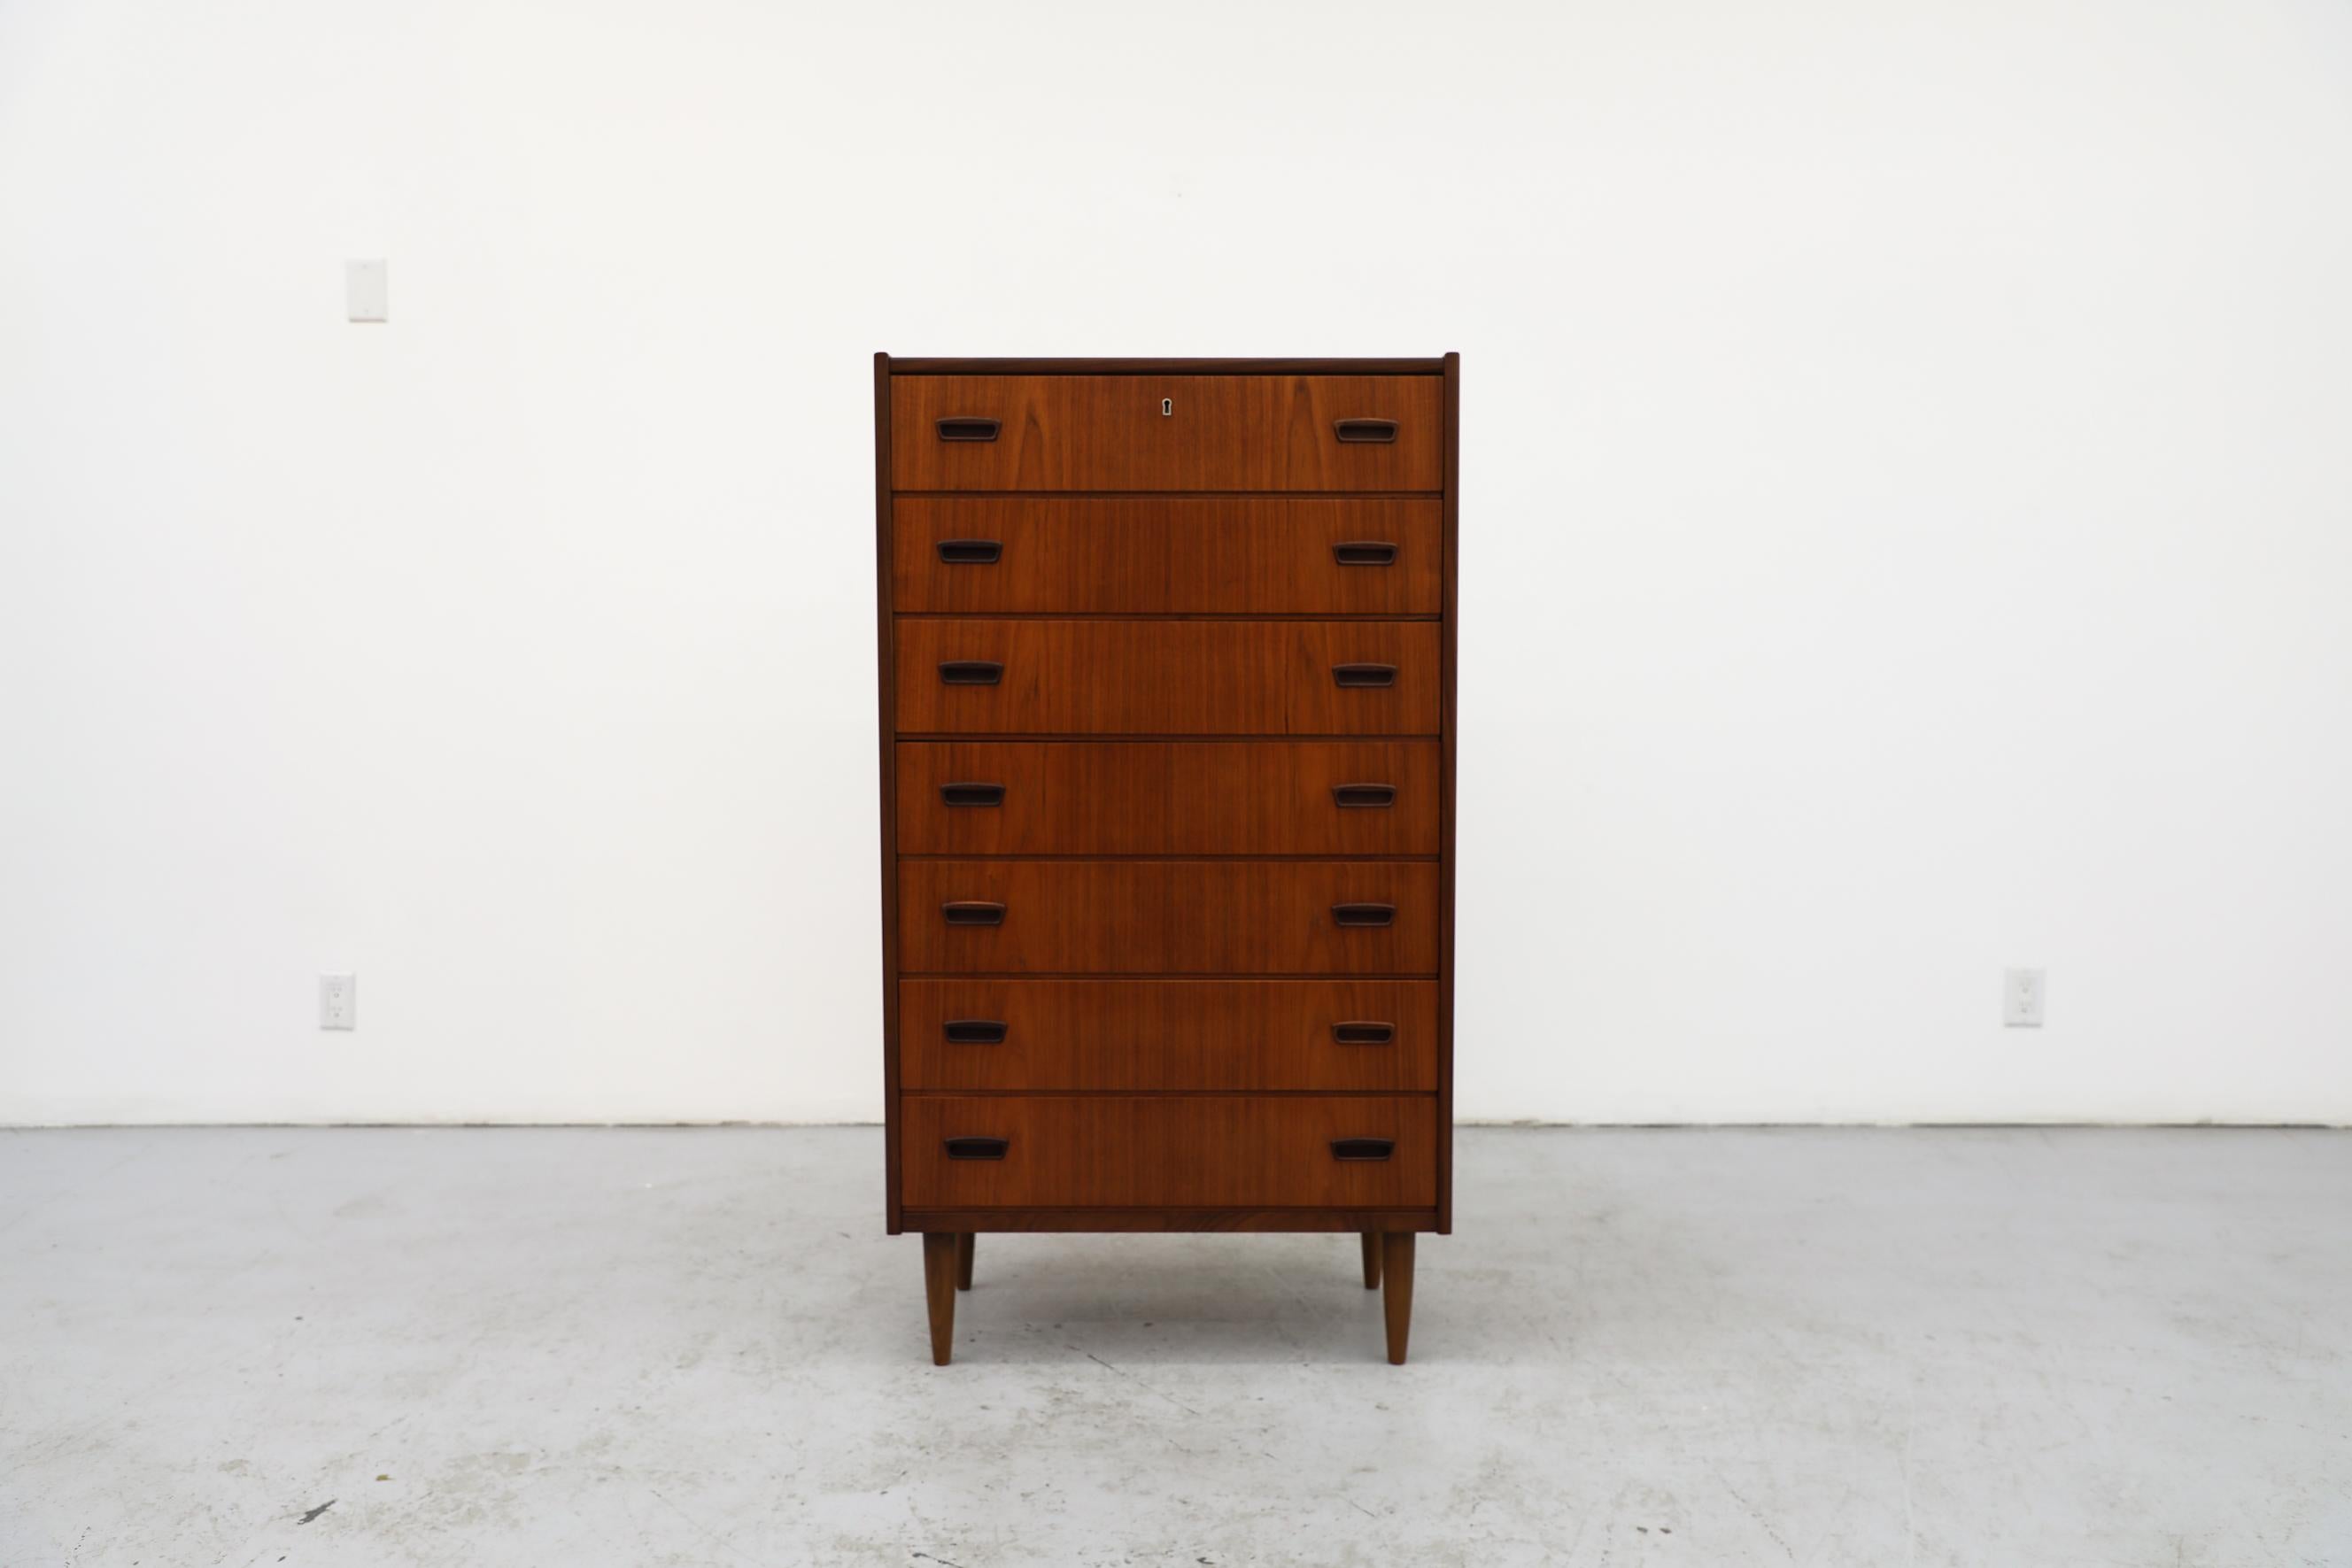 Teak dresser with 7 slender drawers and tapered legs. This piece has been lightly refinished with some remaining visible wear, consistent with its age and use. Missing key.